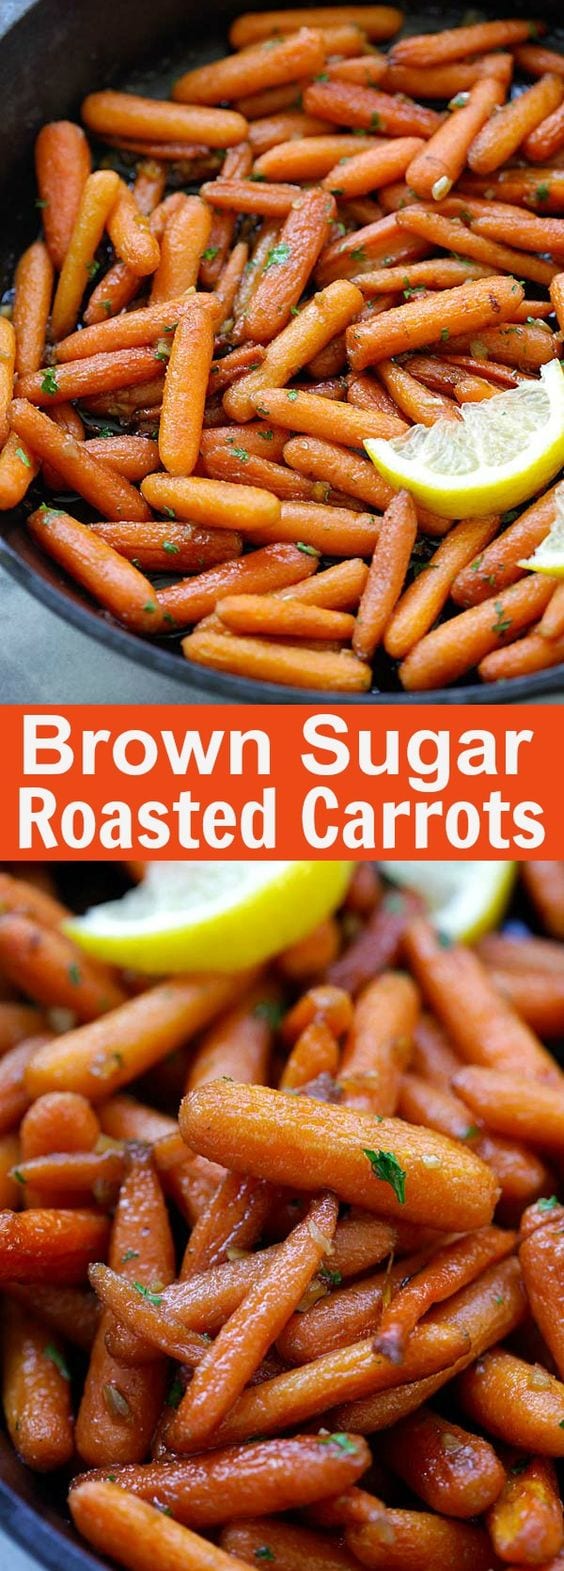 Brown Sugar Roasted Carrots - the sweetest, most tender and buttery roasted carrots recipe ever! Five ingredients and 10 mins active time | rasamalaysia.com